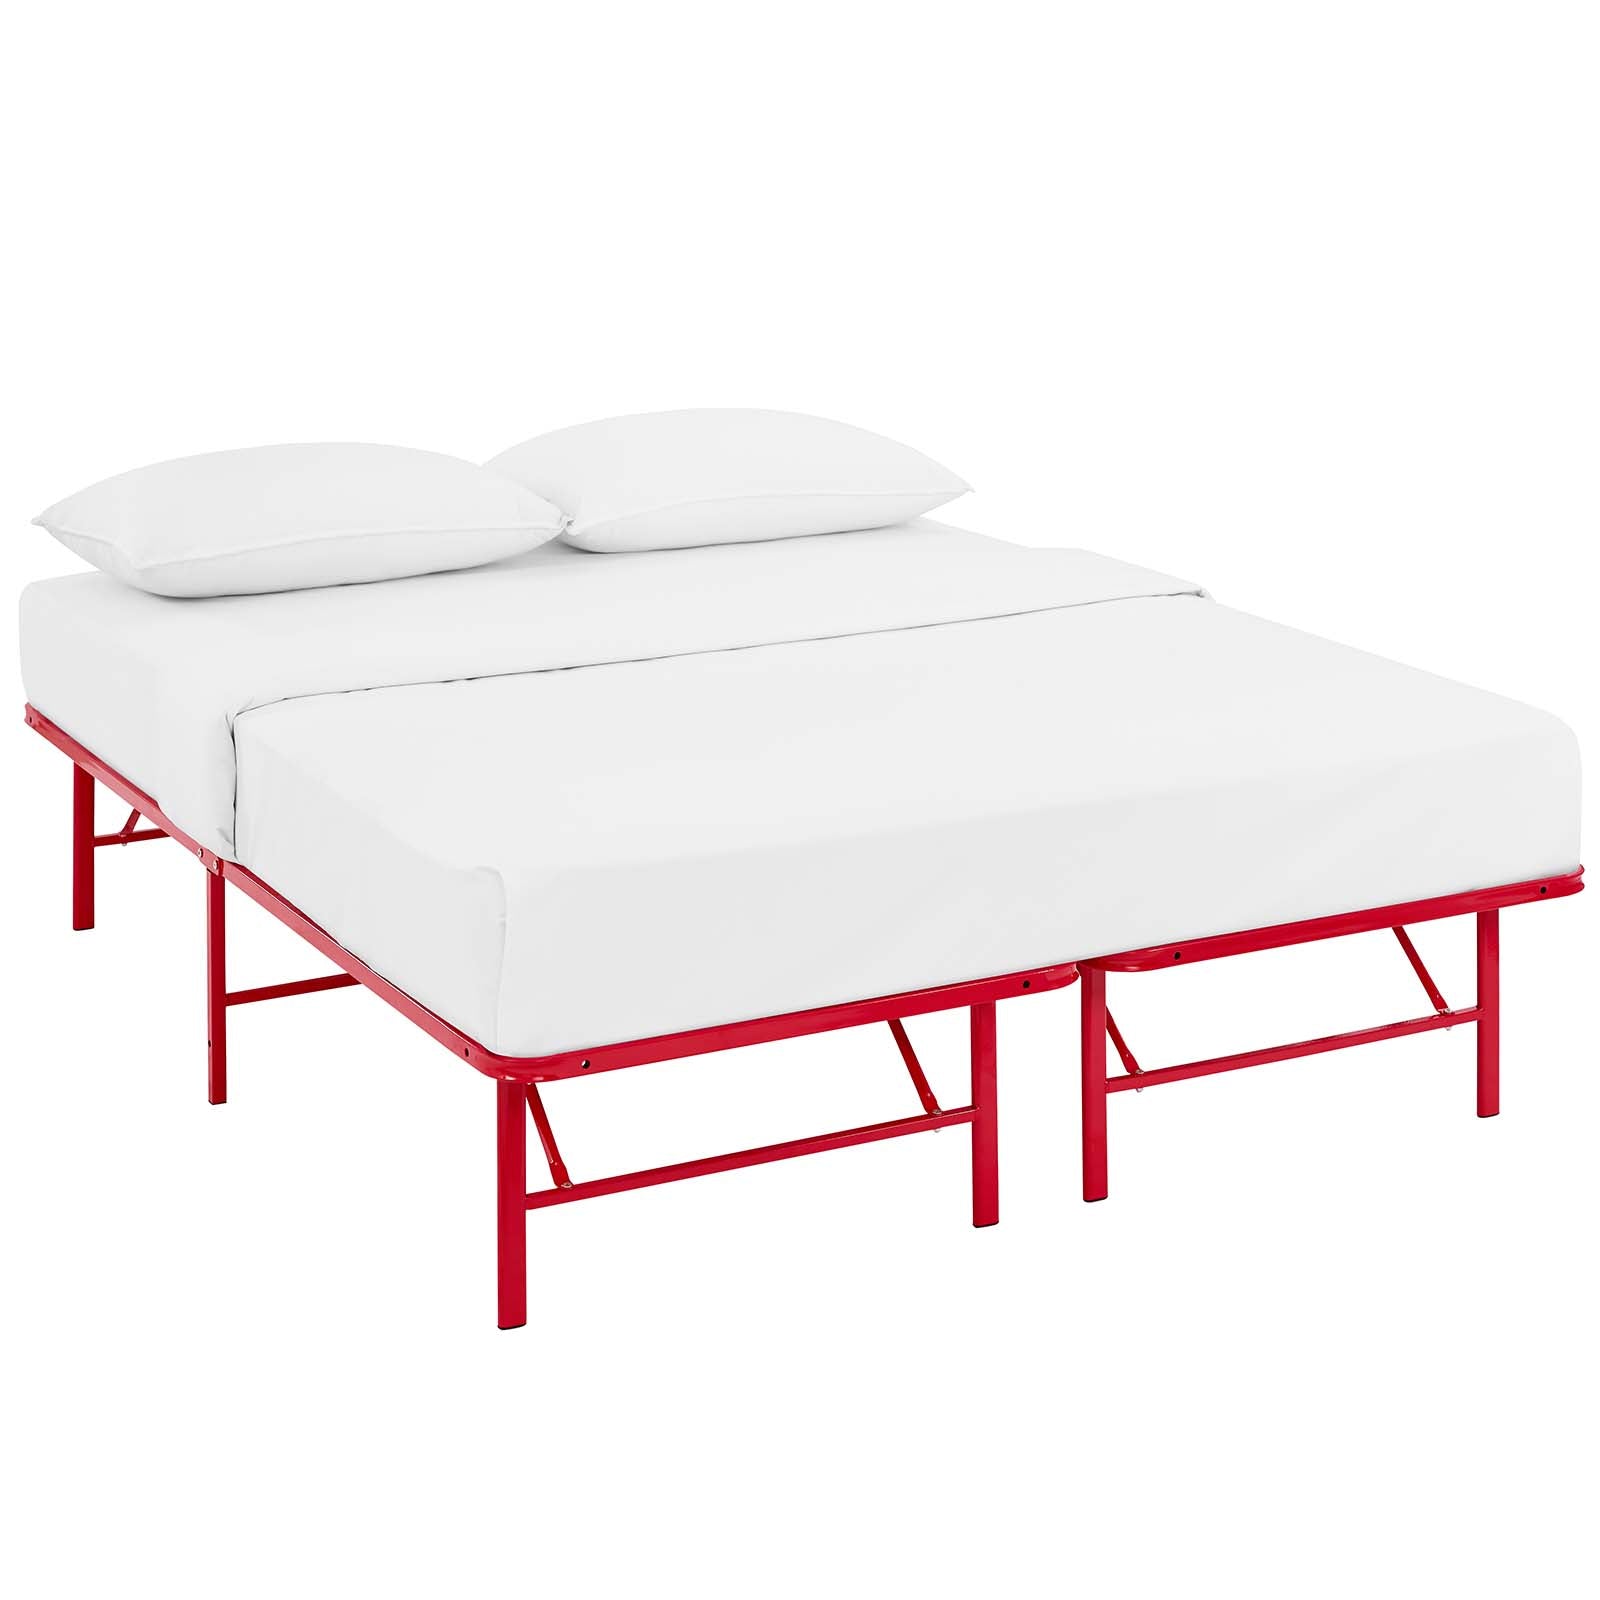 Horizon Queen Stainless Steel Bed Frame - East Shore Modern Home Furnishings